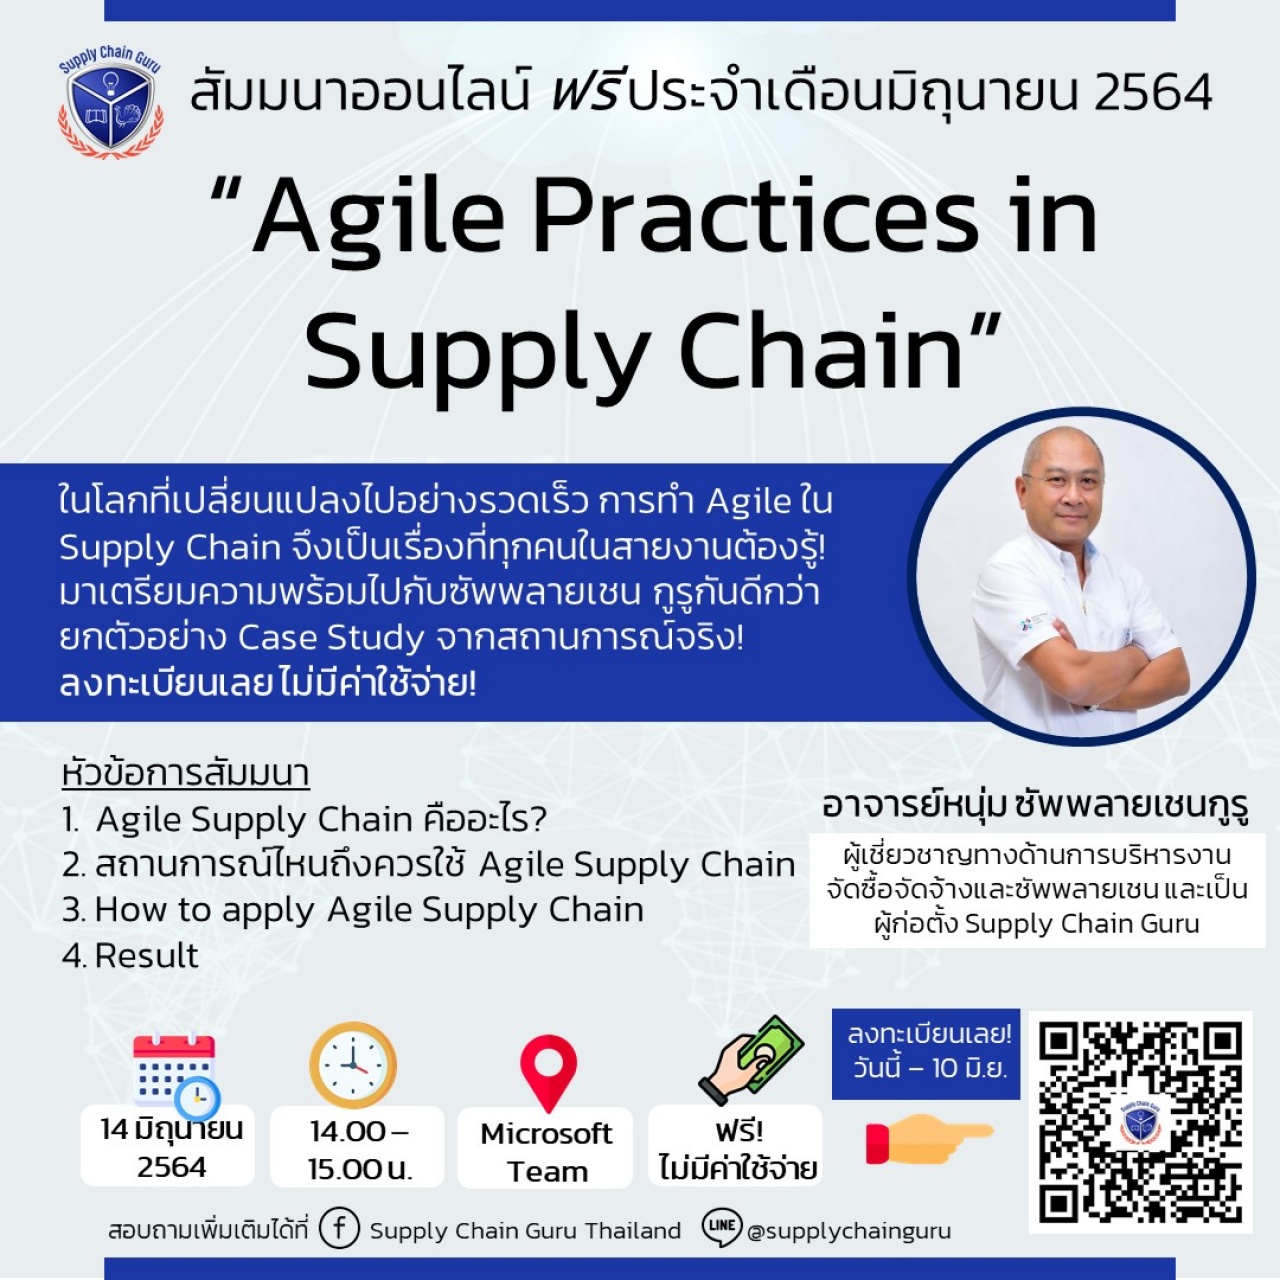 Agile Practices in Supply Chain